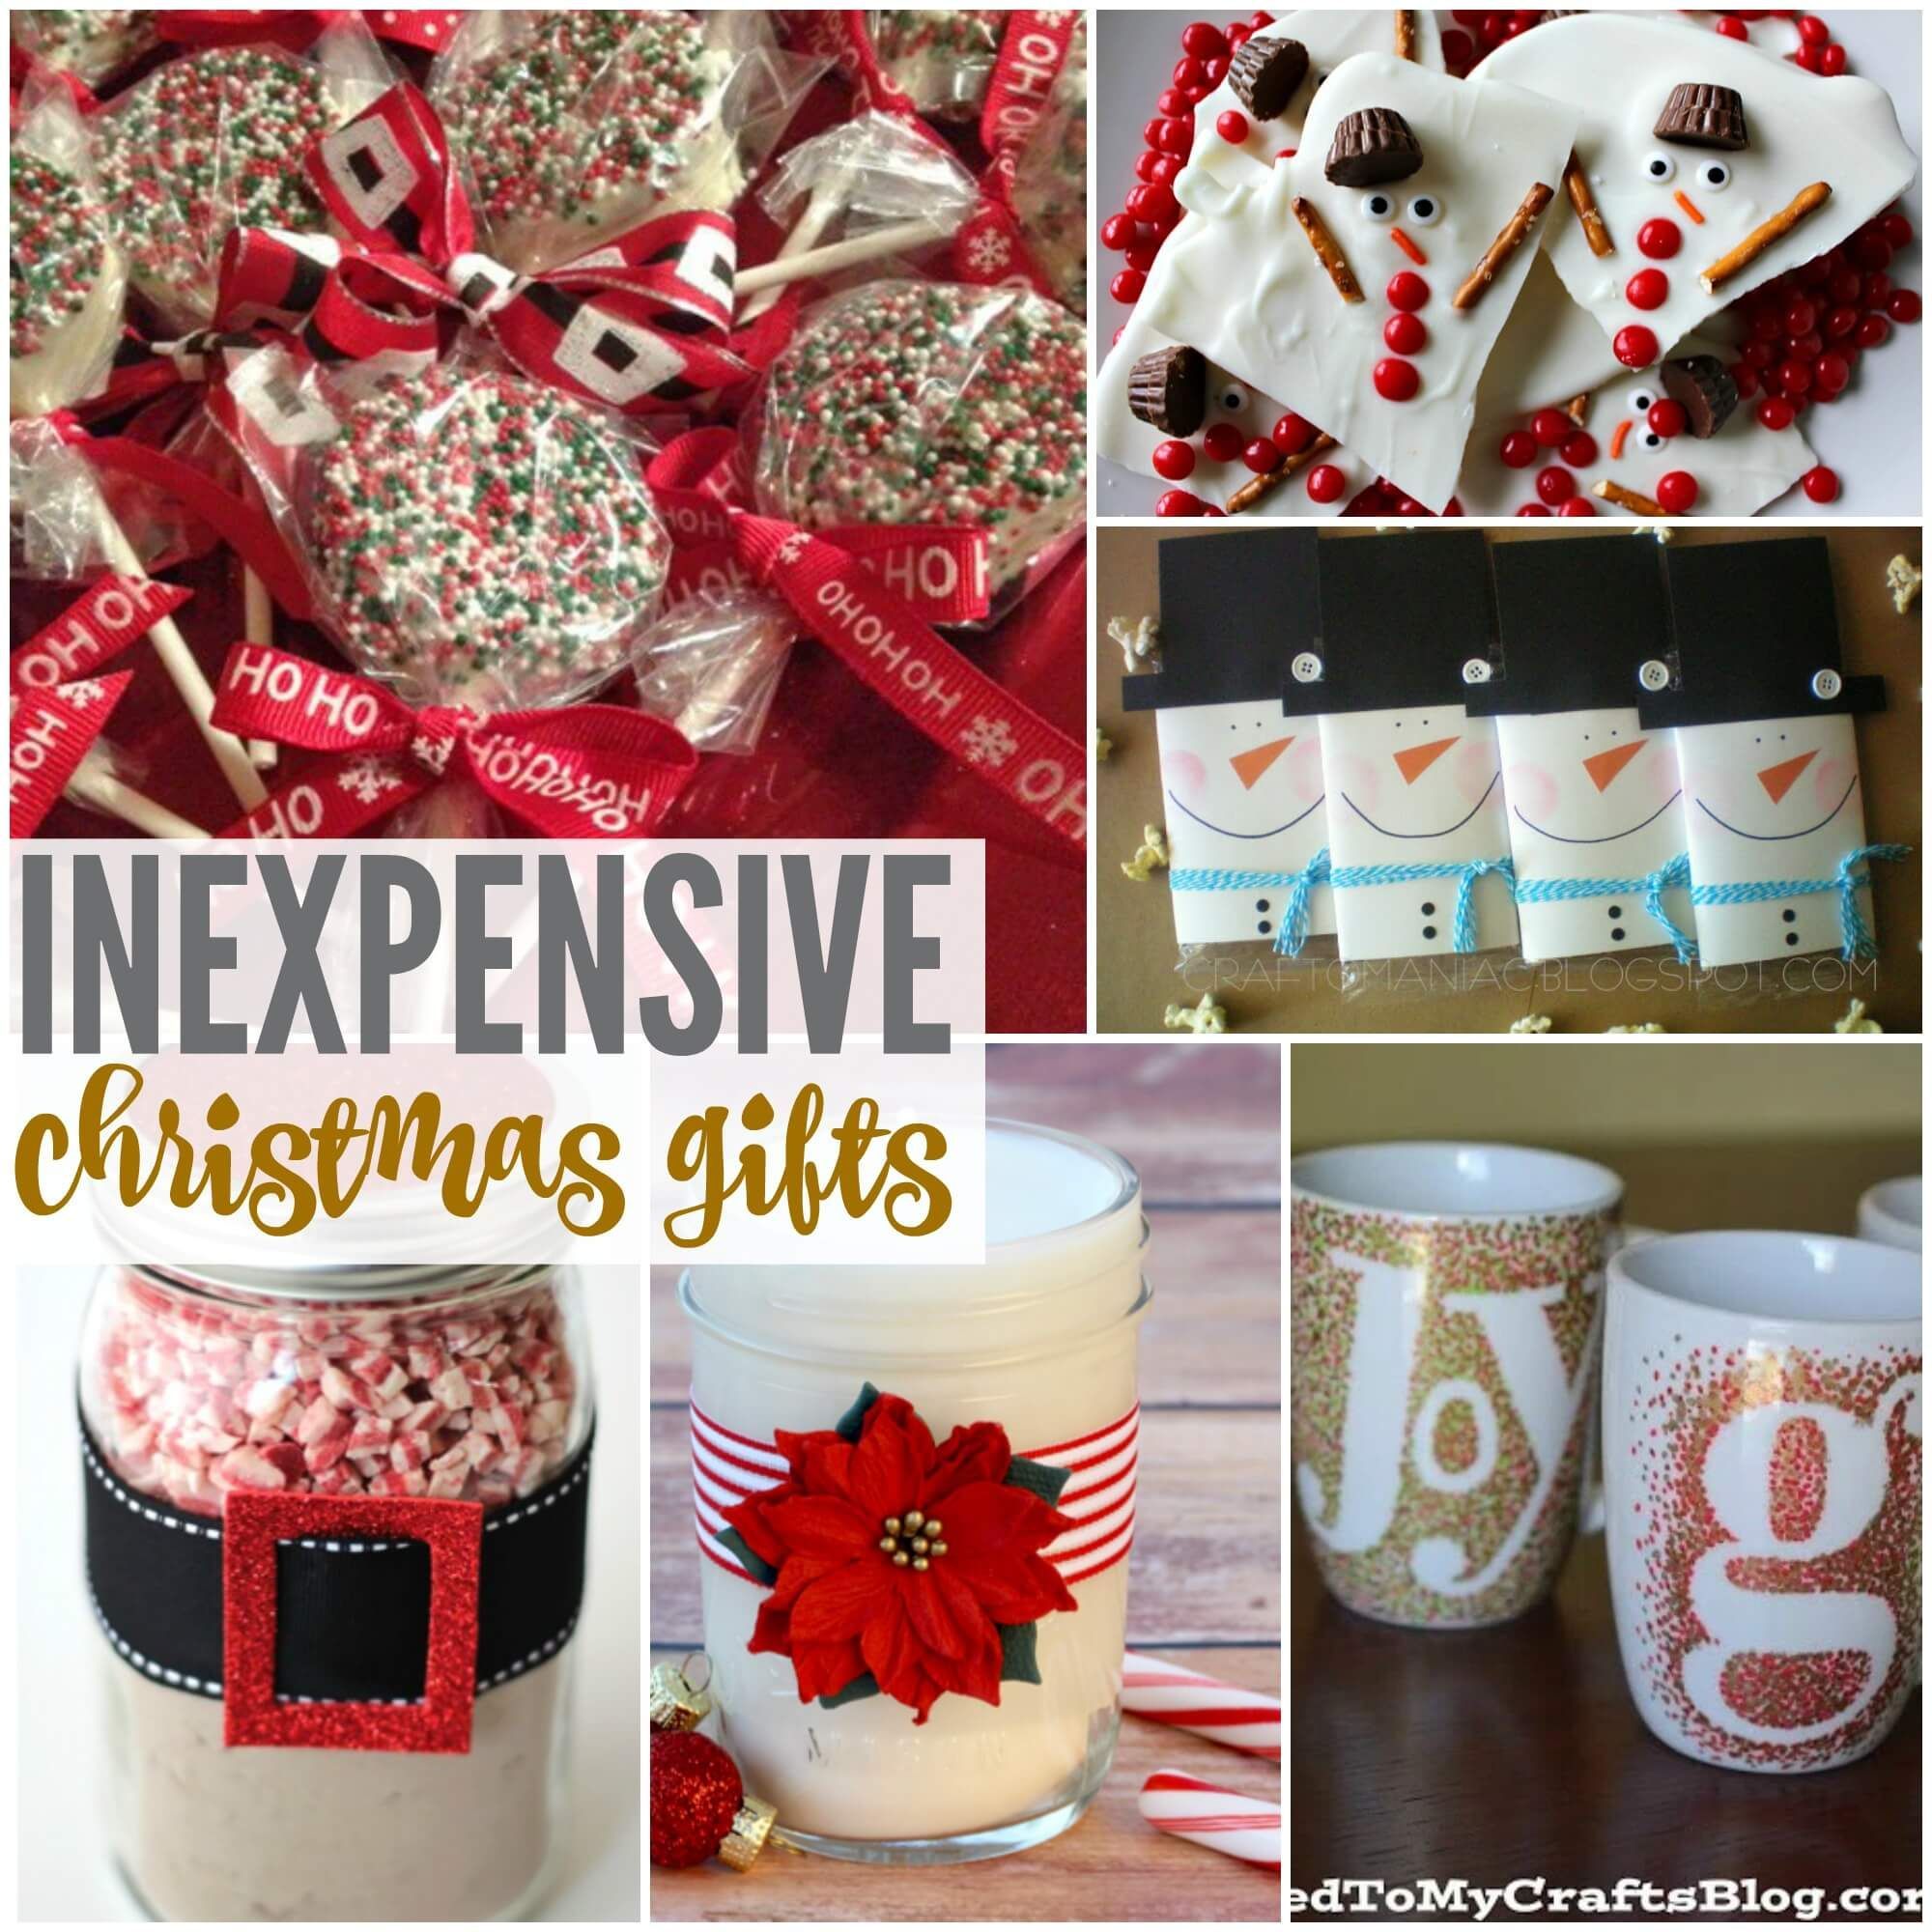 20 Inexpensive Christmas Gifts for CoWorkers & Friends -   19 xmas gifts for coworkers cheap ideas